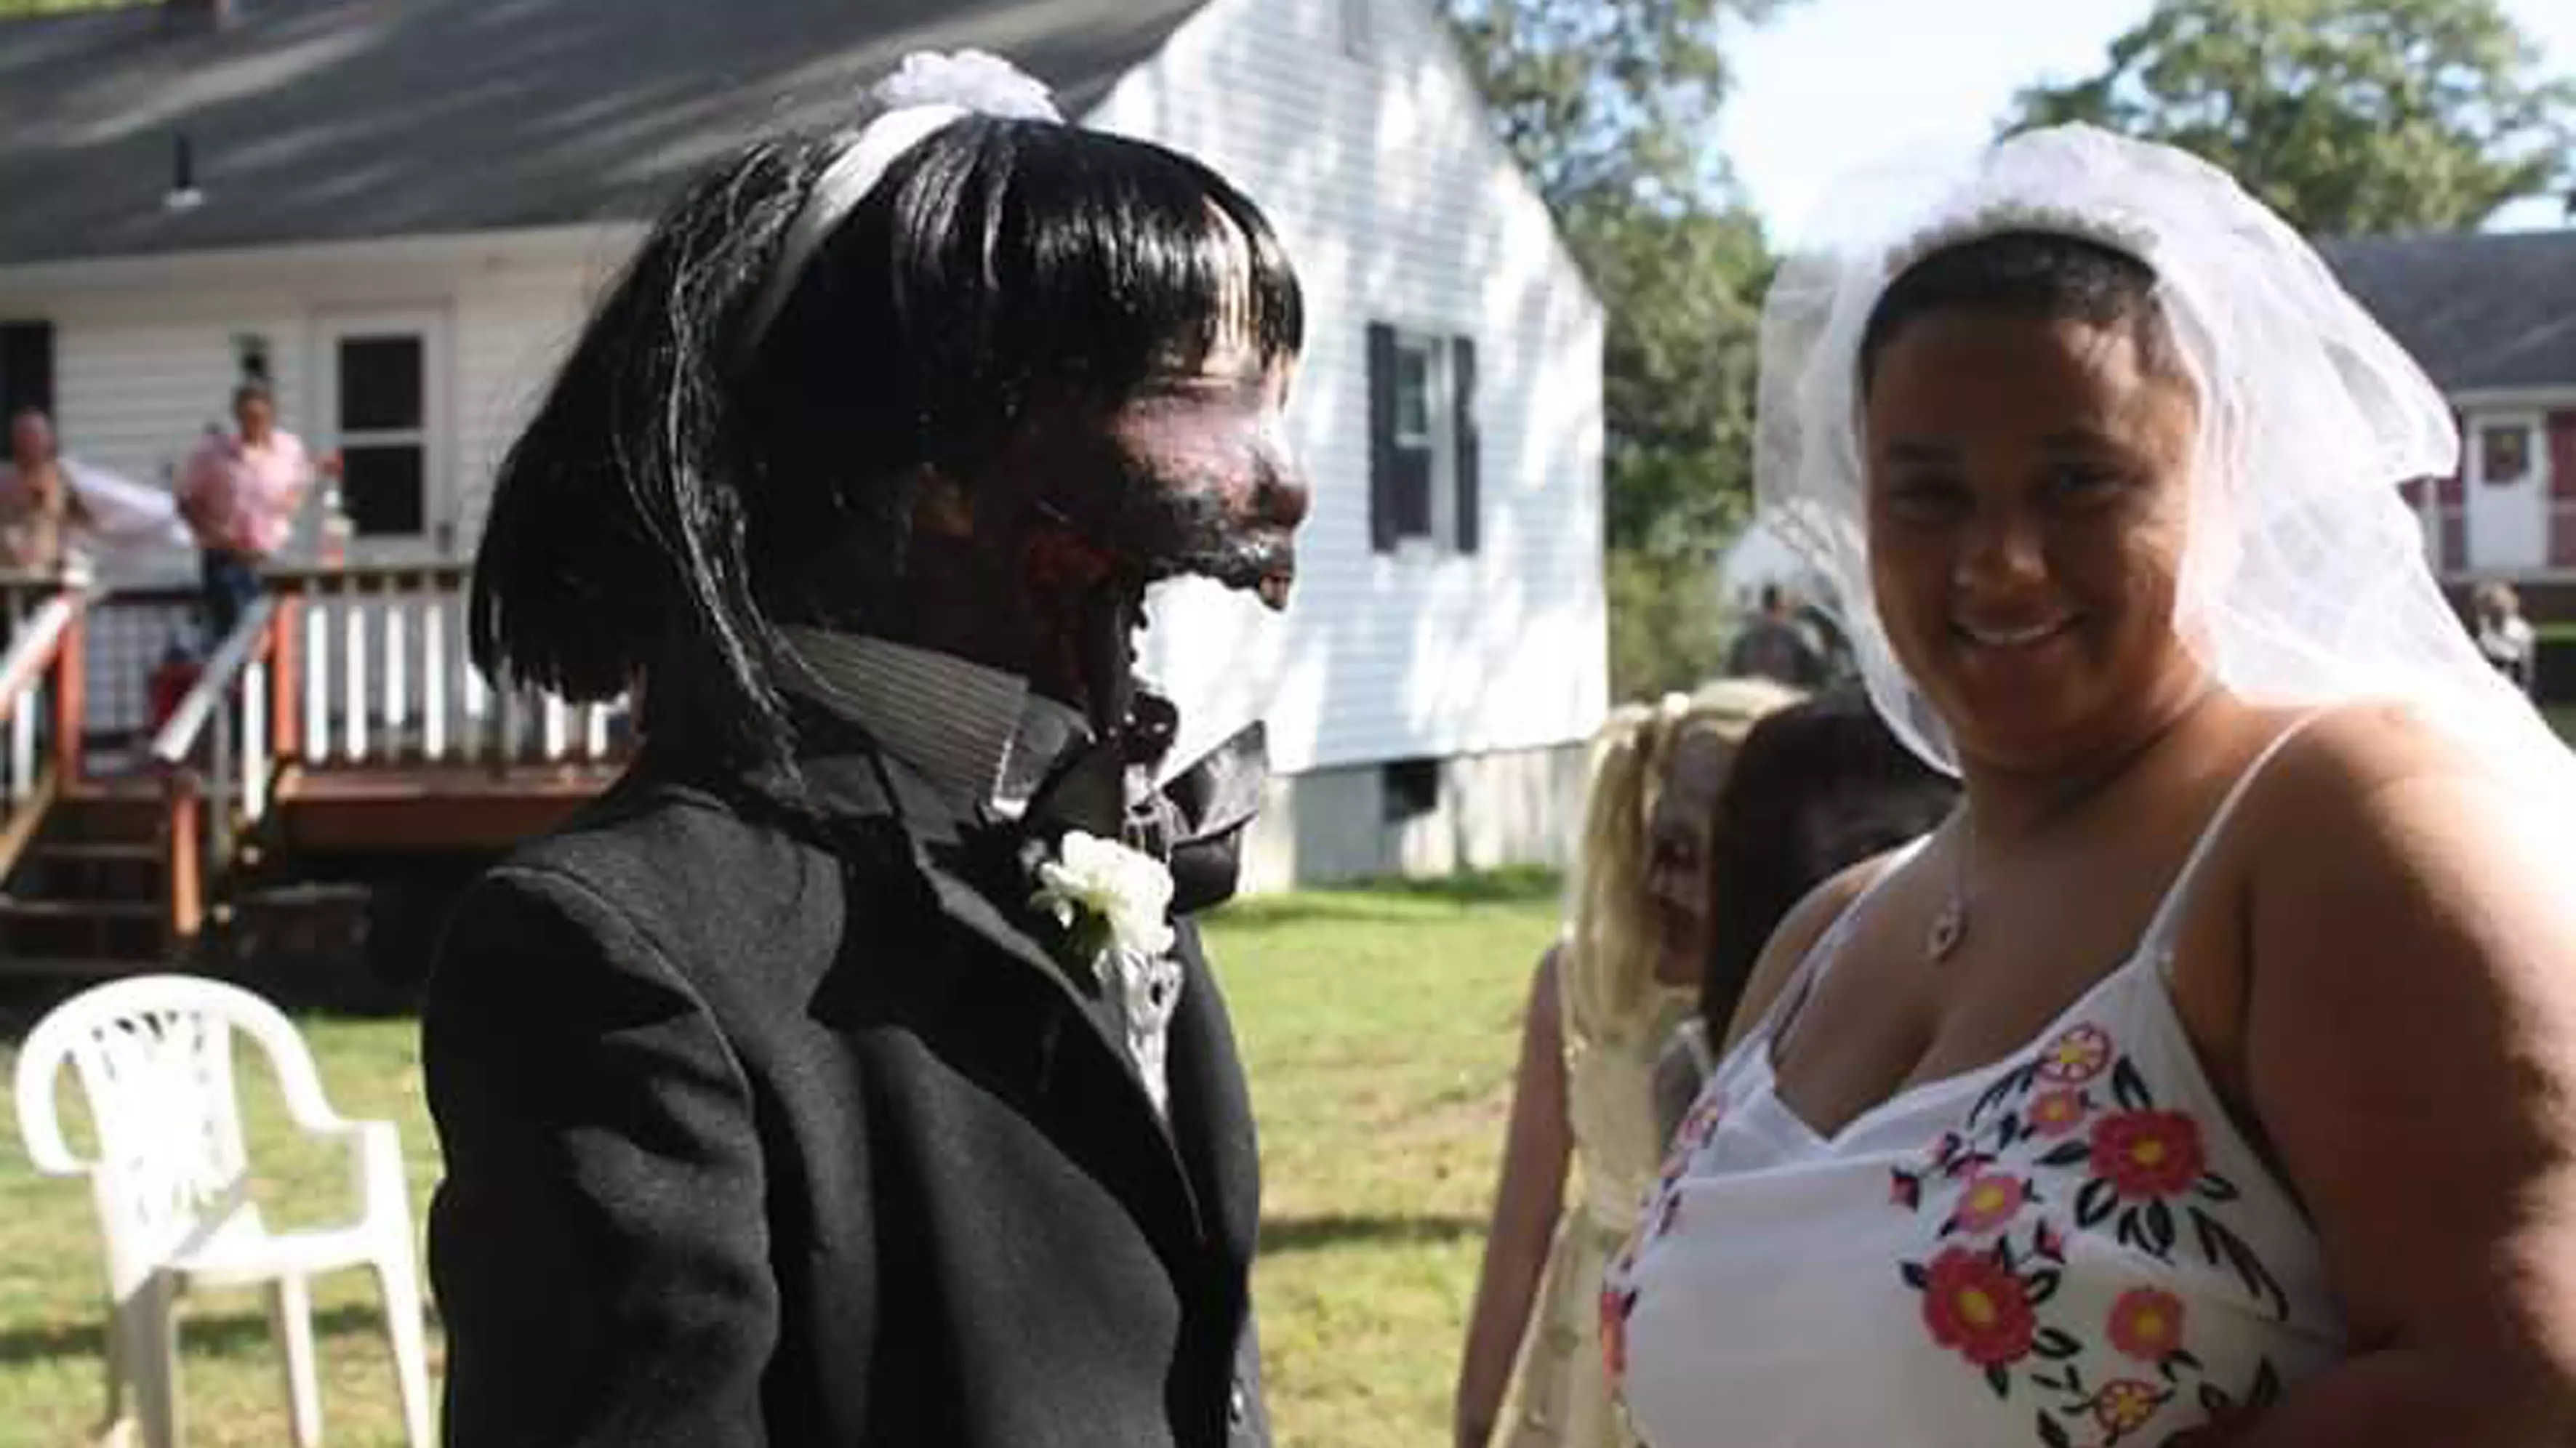 Woman Who Married Zombie Doll Gets Police To Verify That Wife Is Not 'Dead Child'